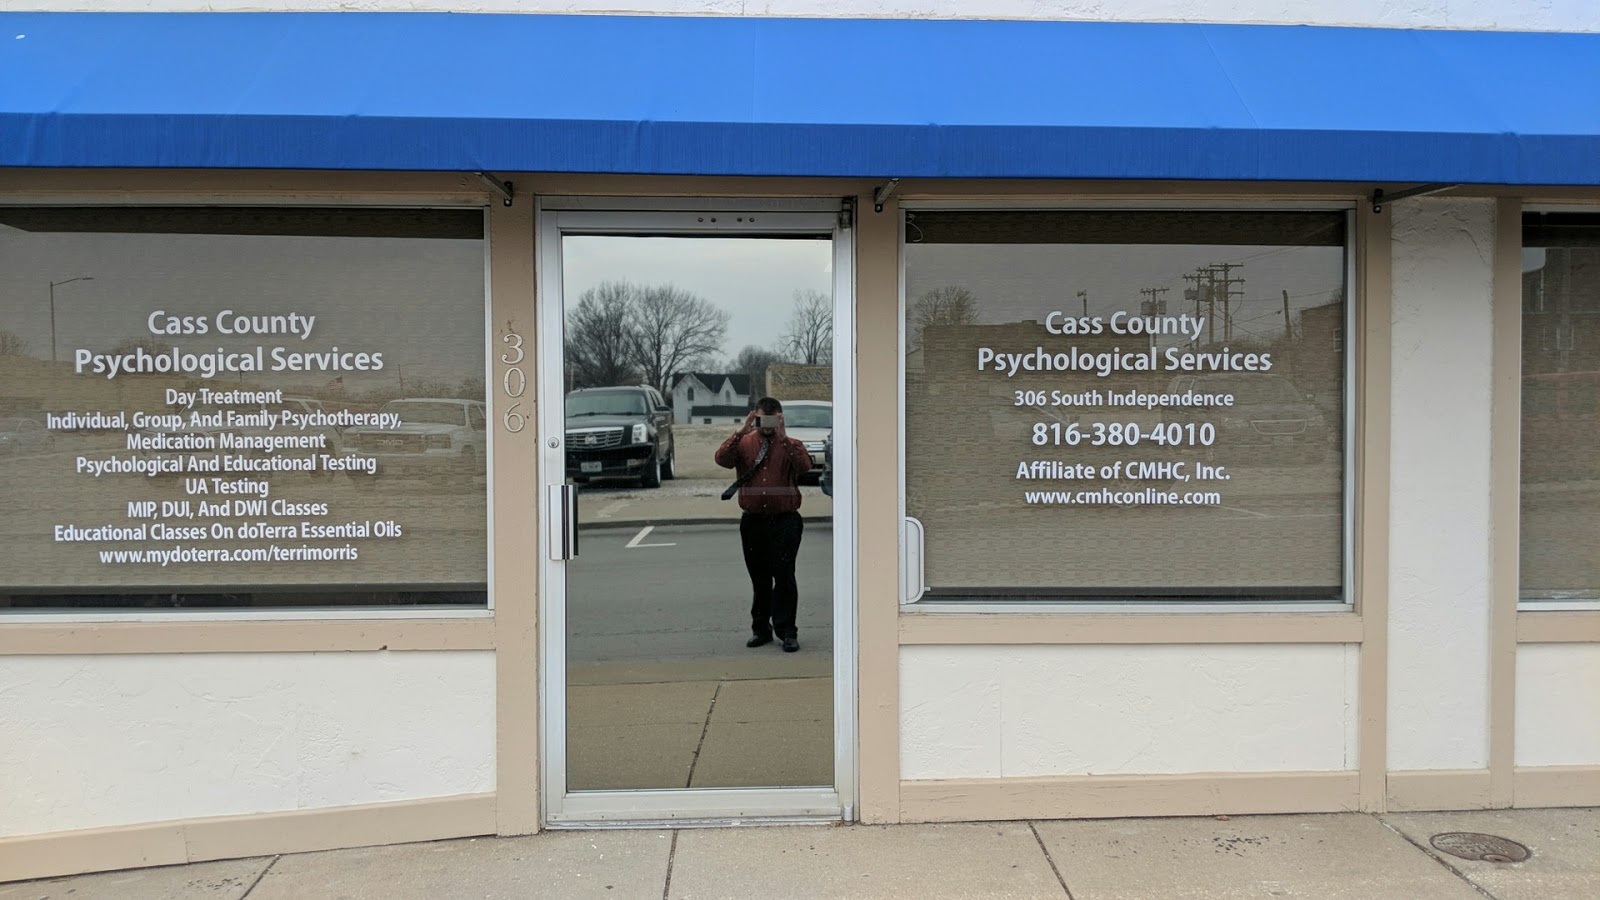 Cass County Psychological Services